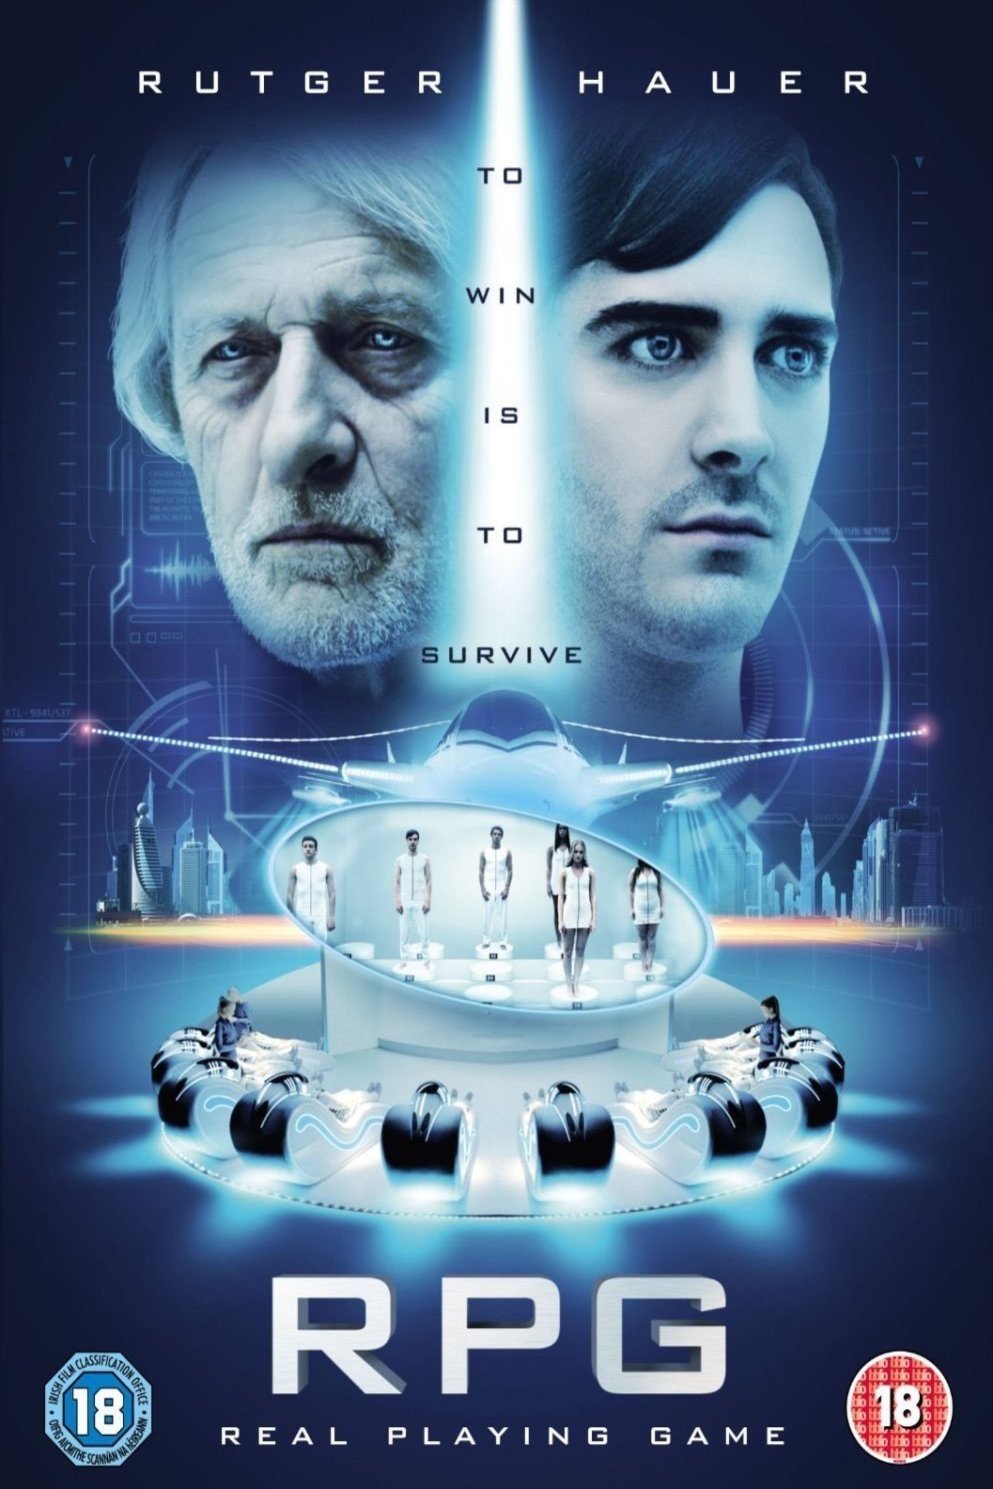 Poster of the movie Real Playing Game